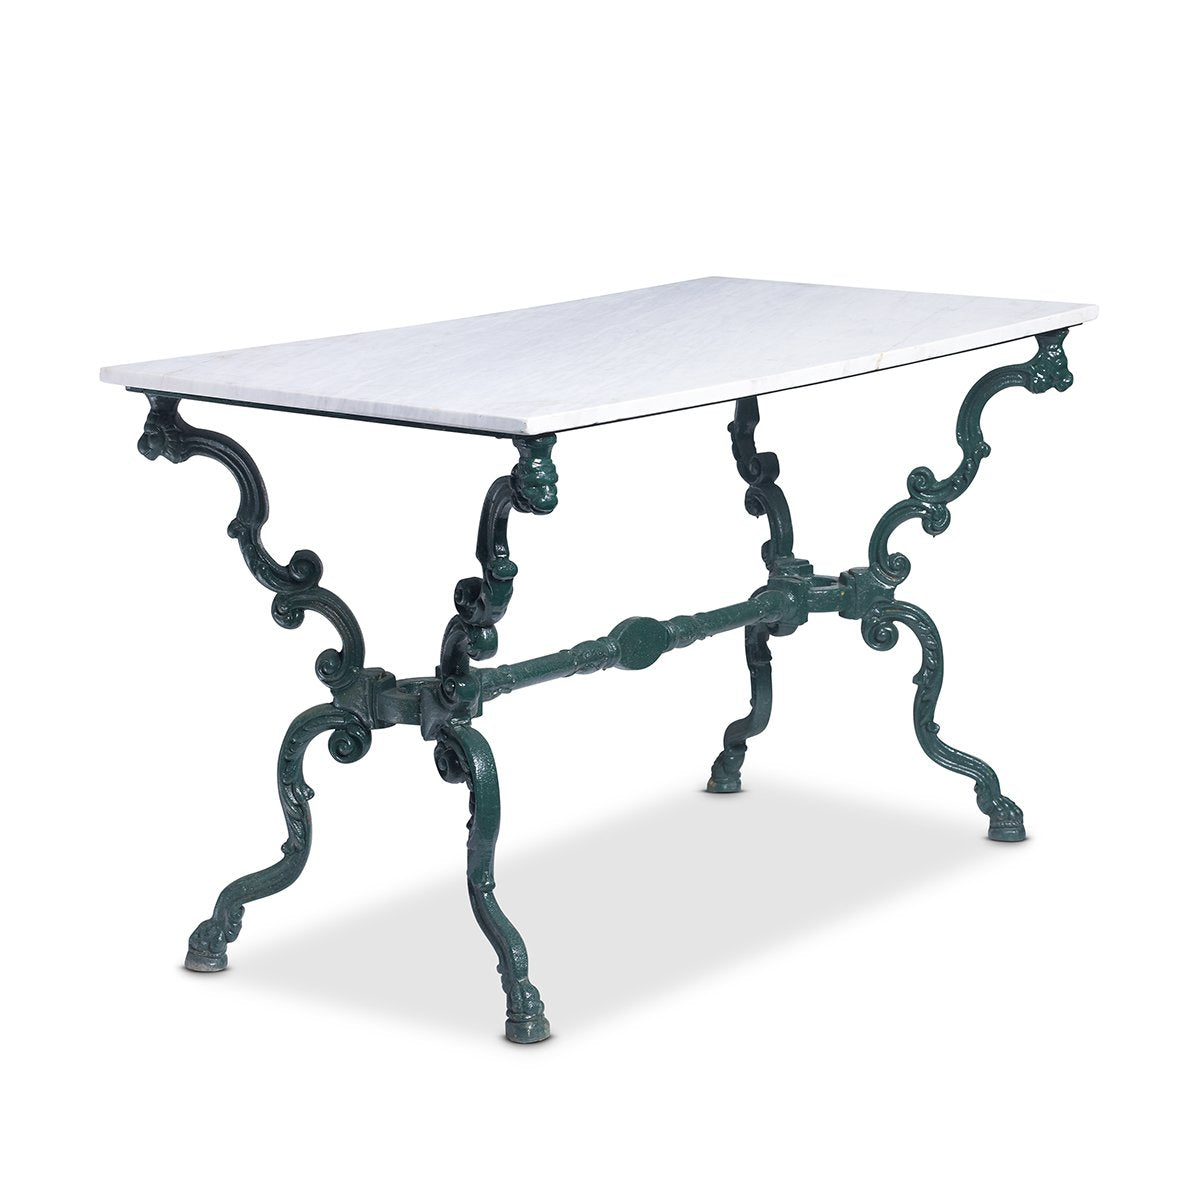 SOLD A stylish dark green painted cast iron rectangular garden table, French 19th Century